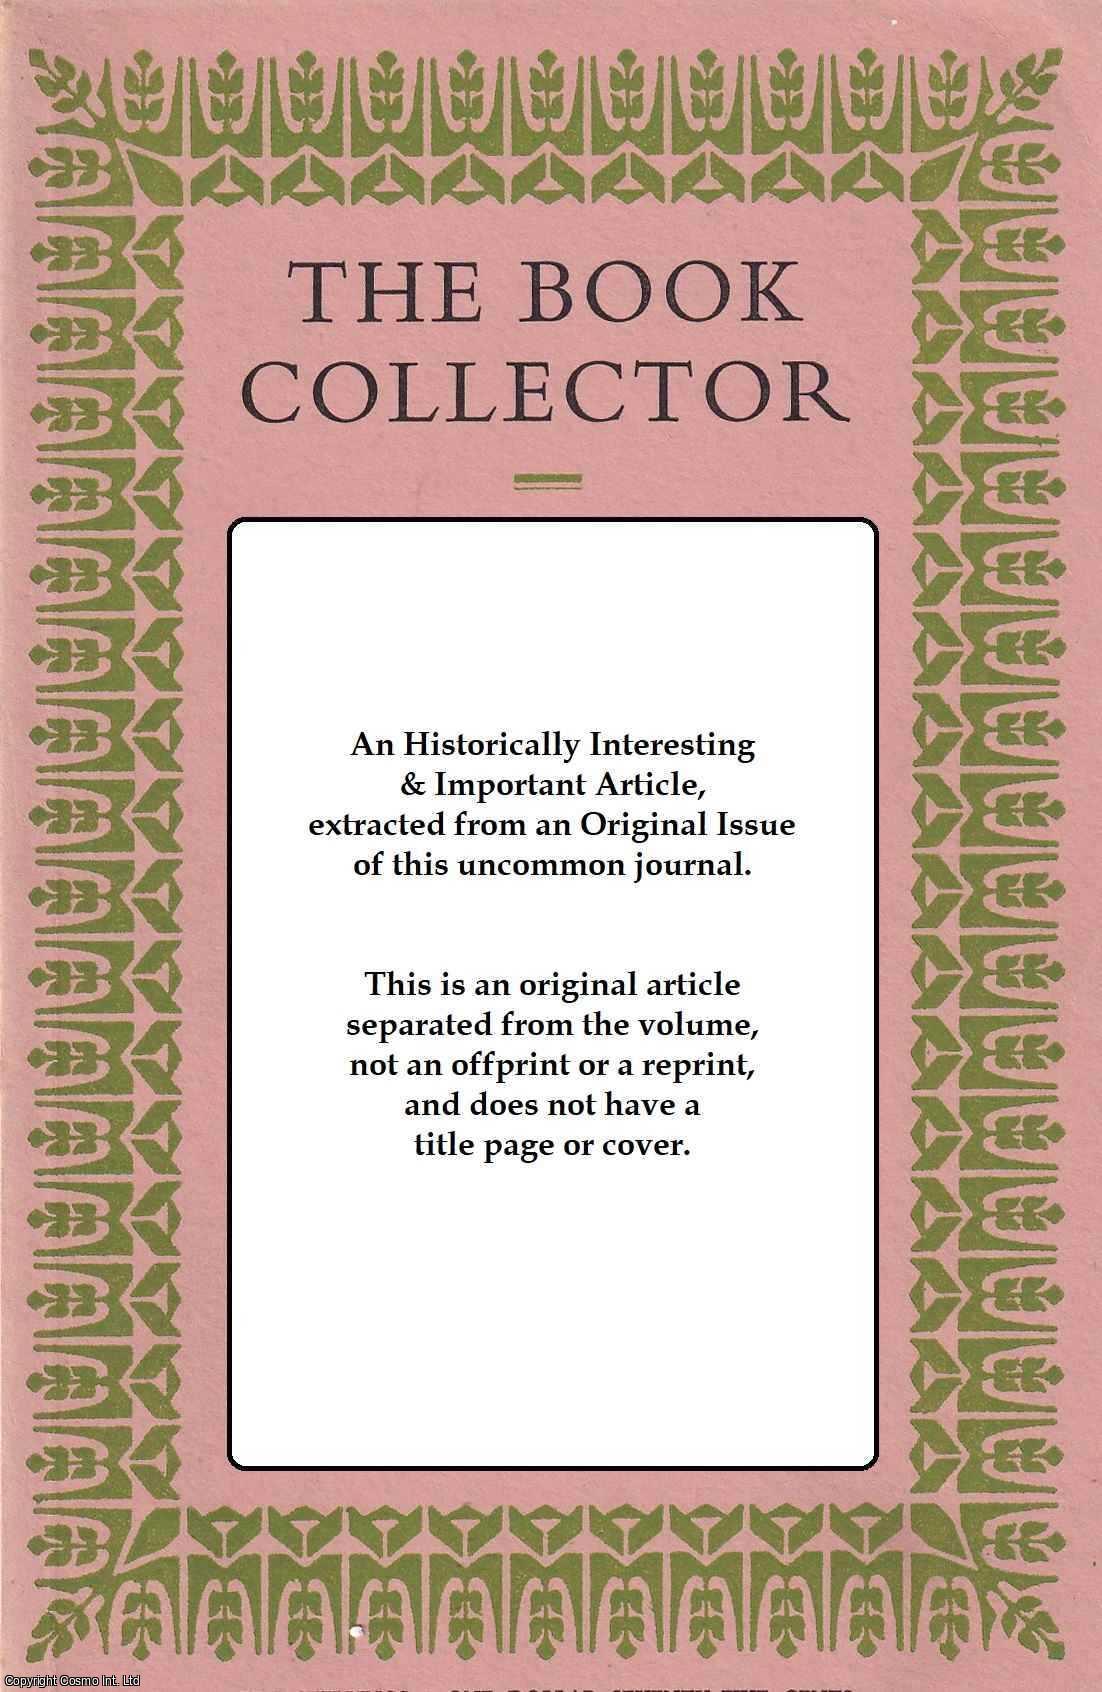 Eugene D. LeMire - William Morris in America: A Publishing History from Archives. This is an original article separated from an issue of The Book Collector journal, 1994.